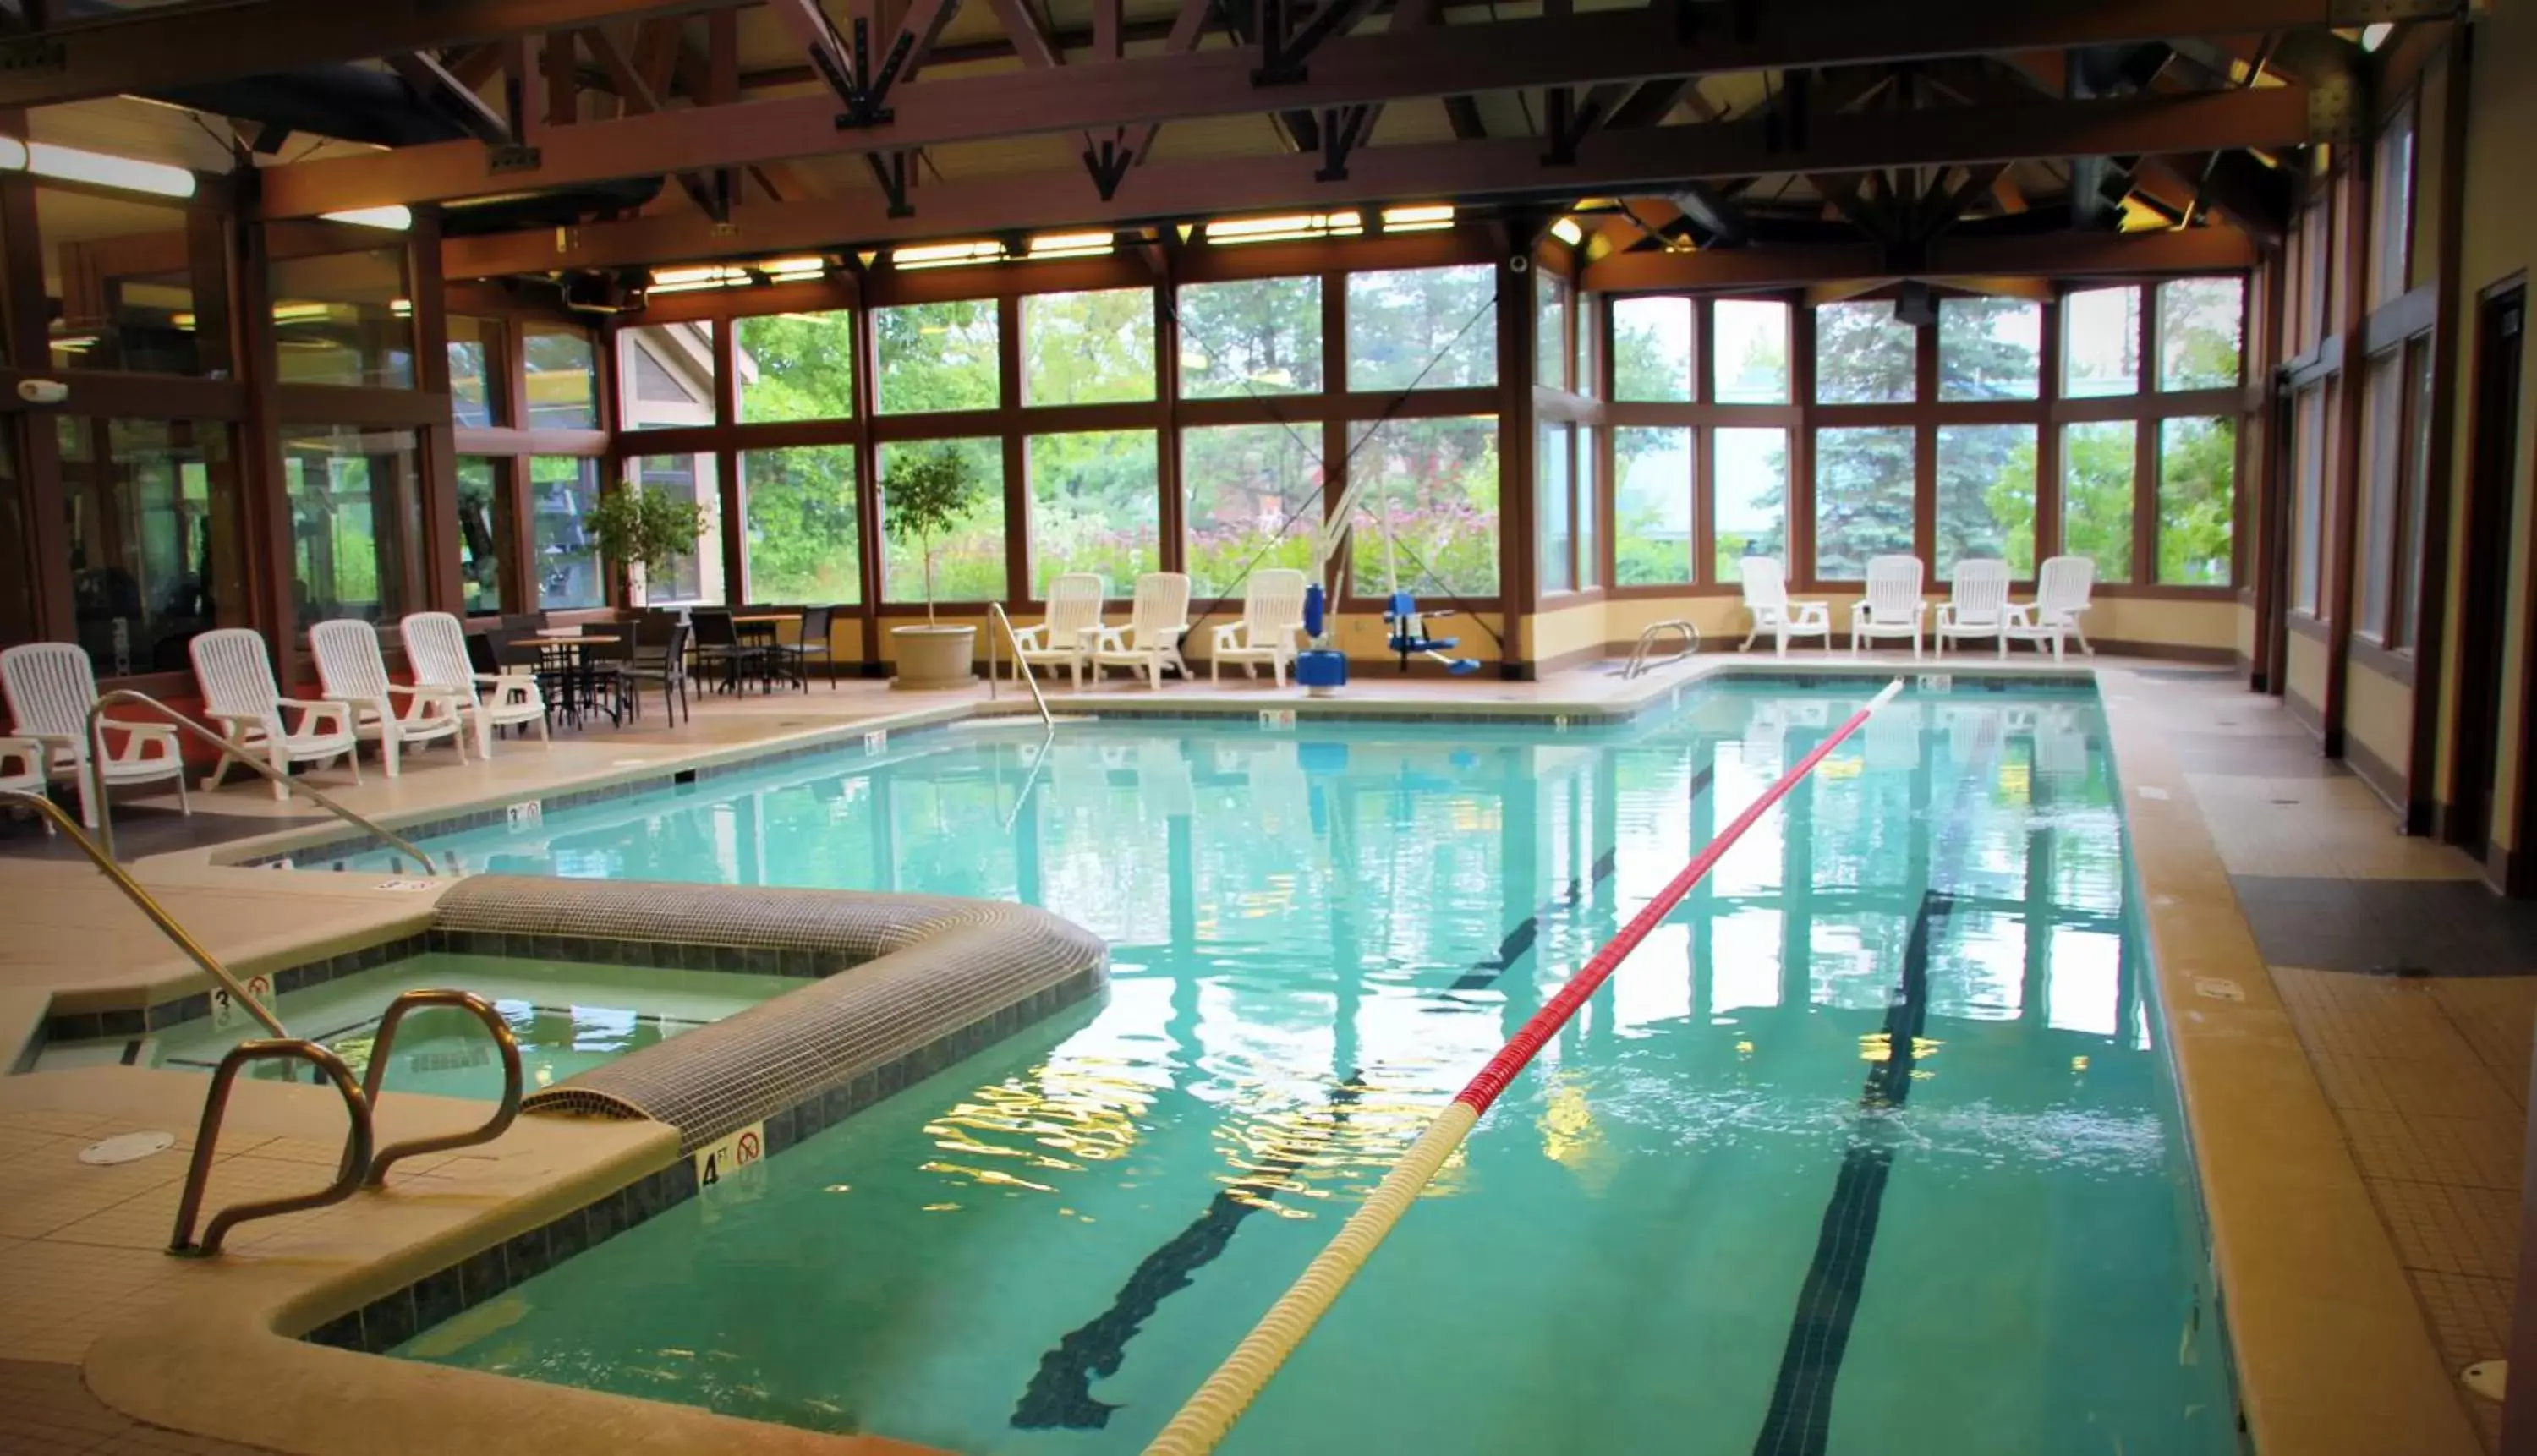 Day, Swimming Pool in Crystal Mountain